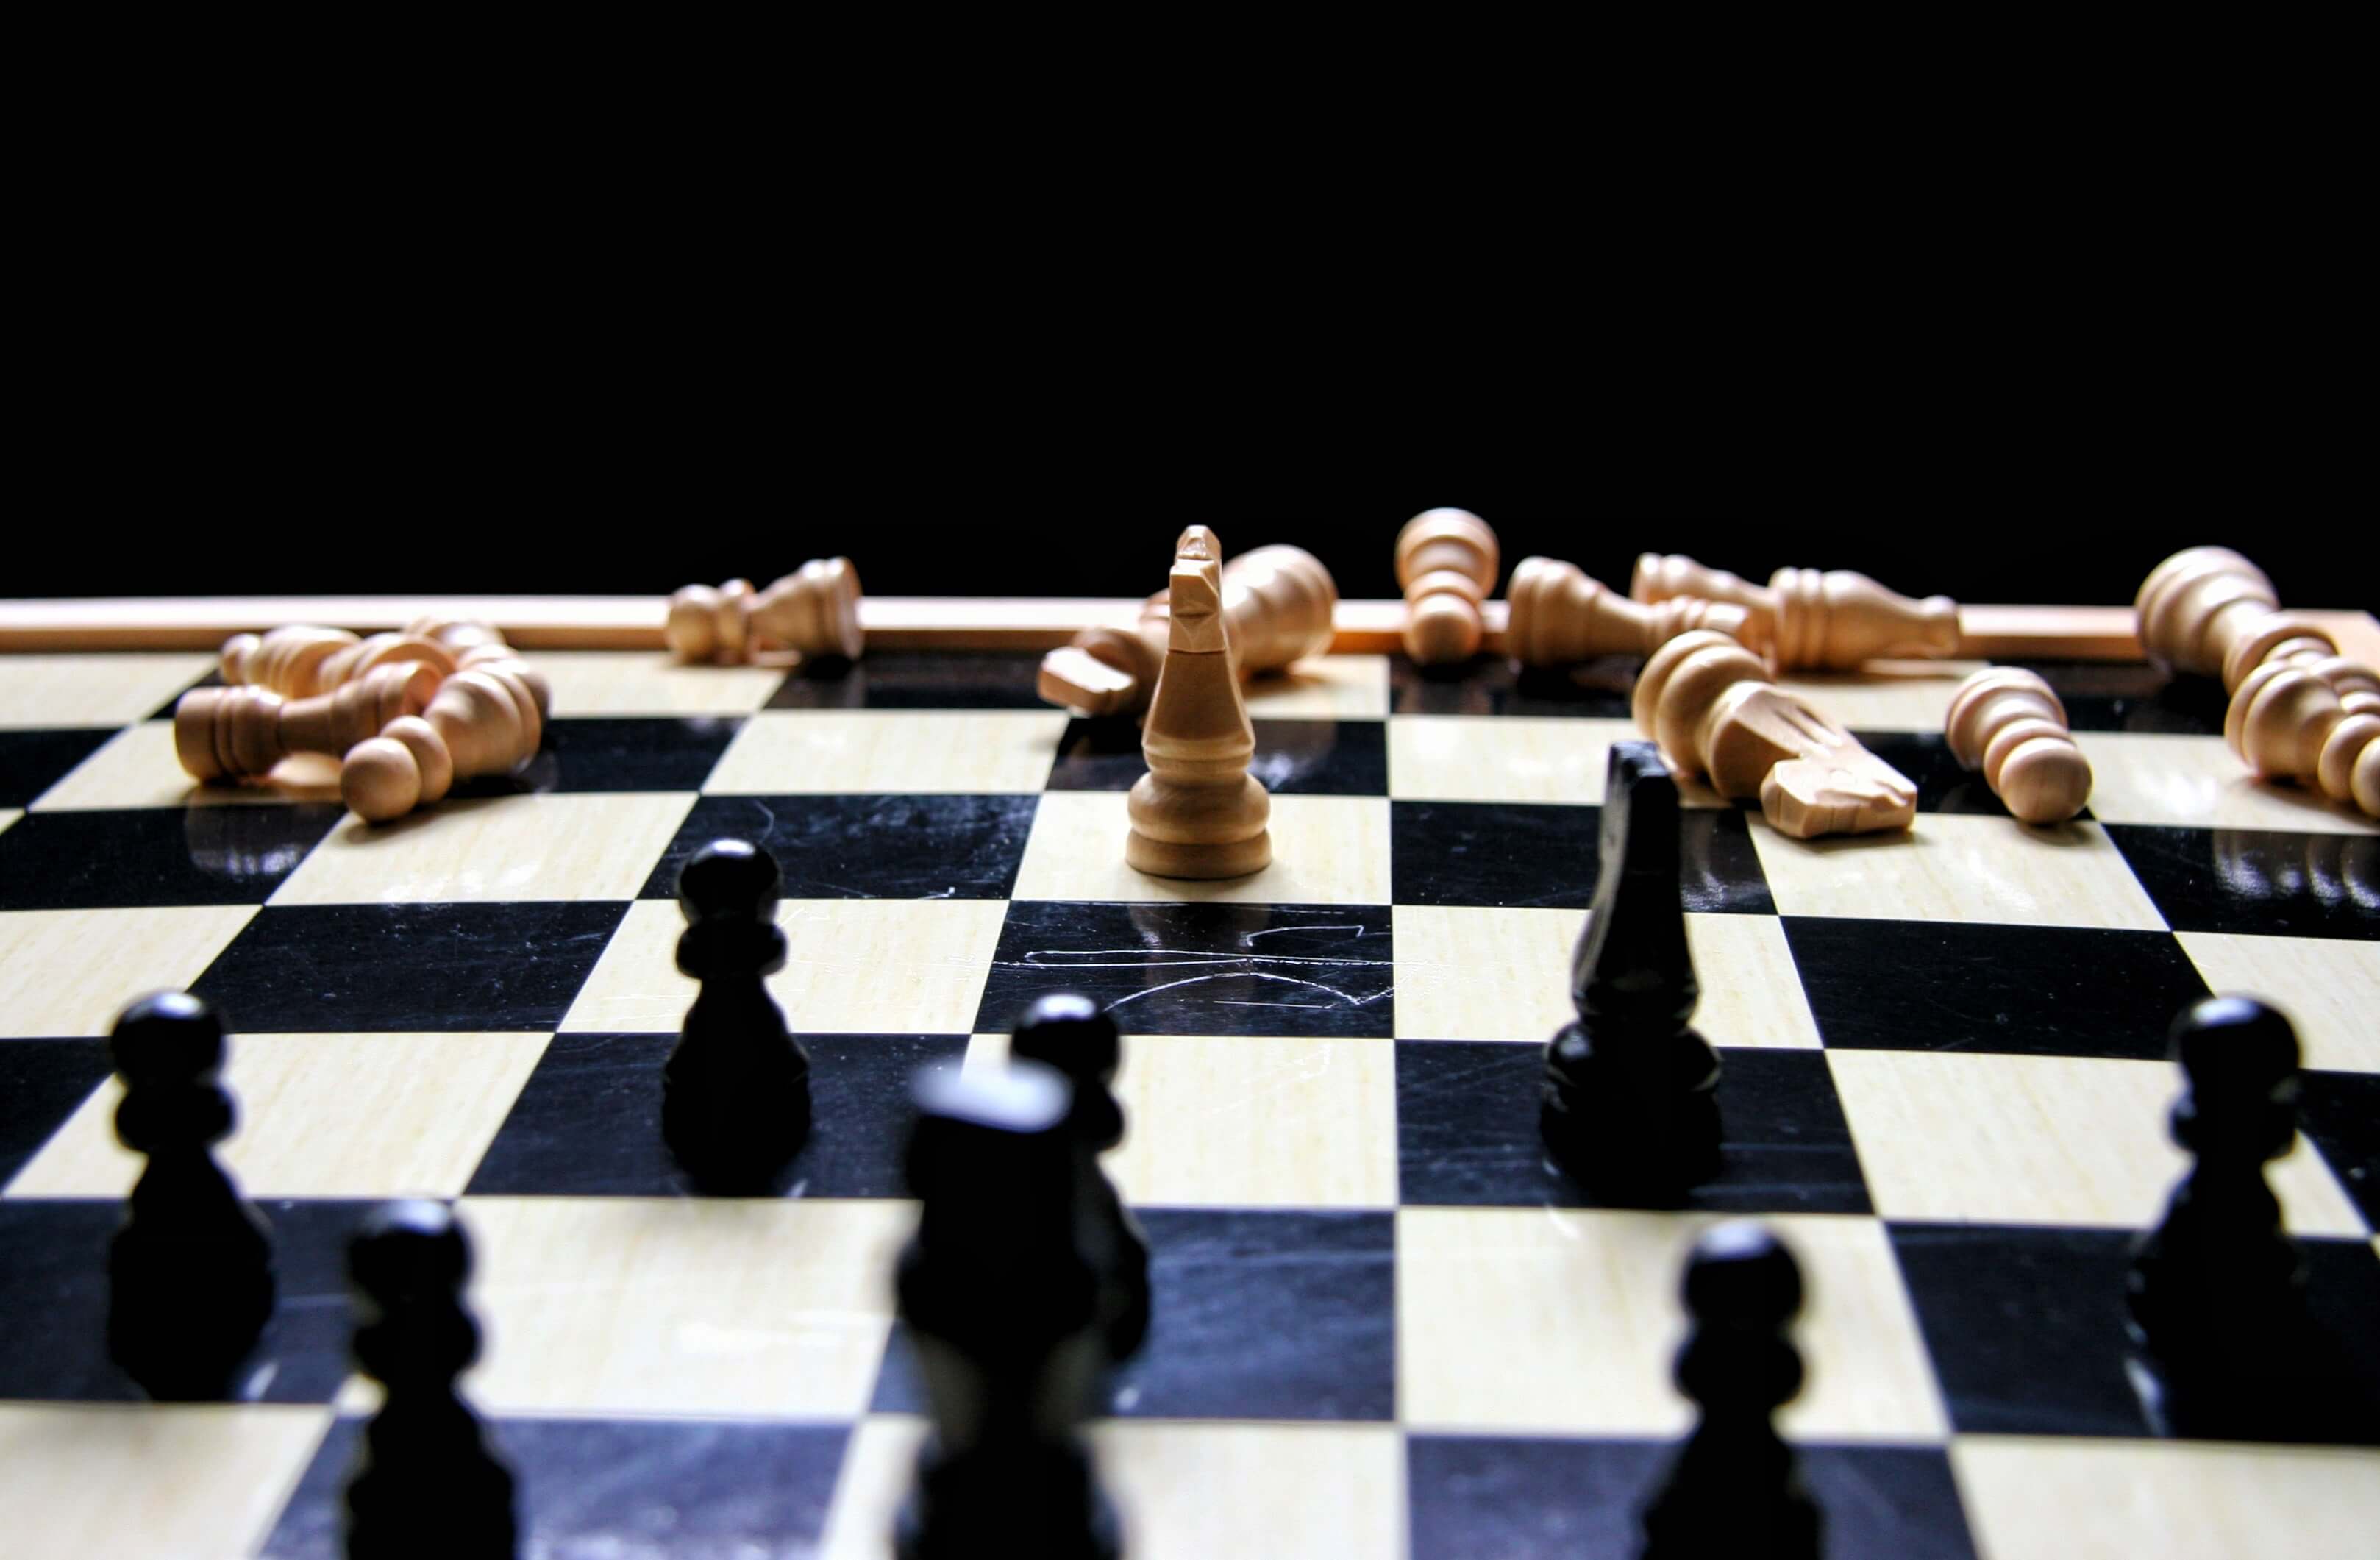 A chess game being played